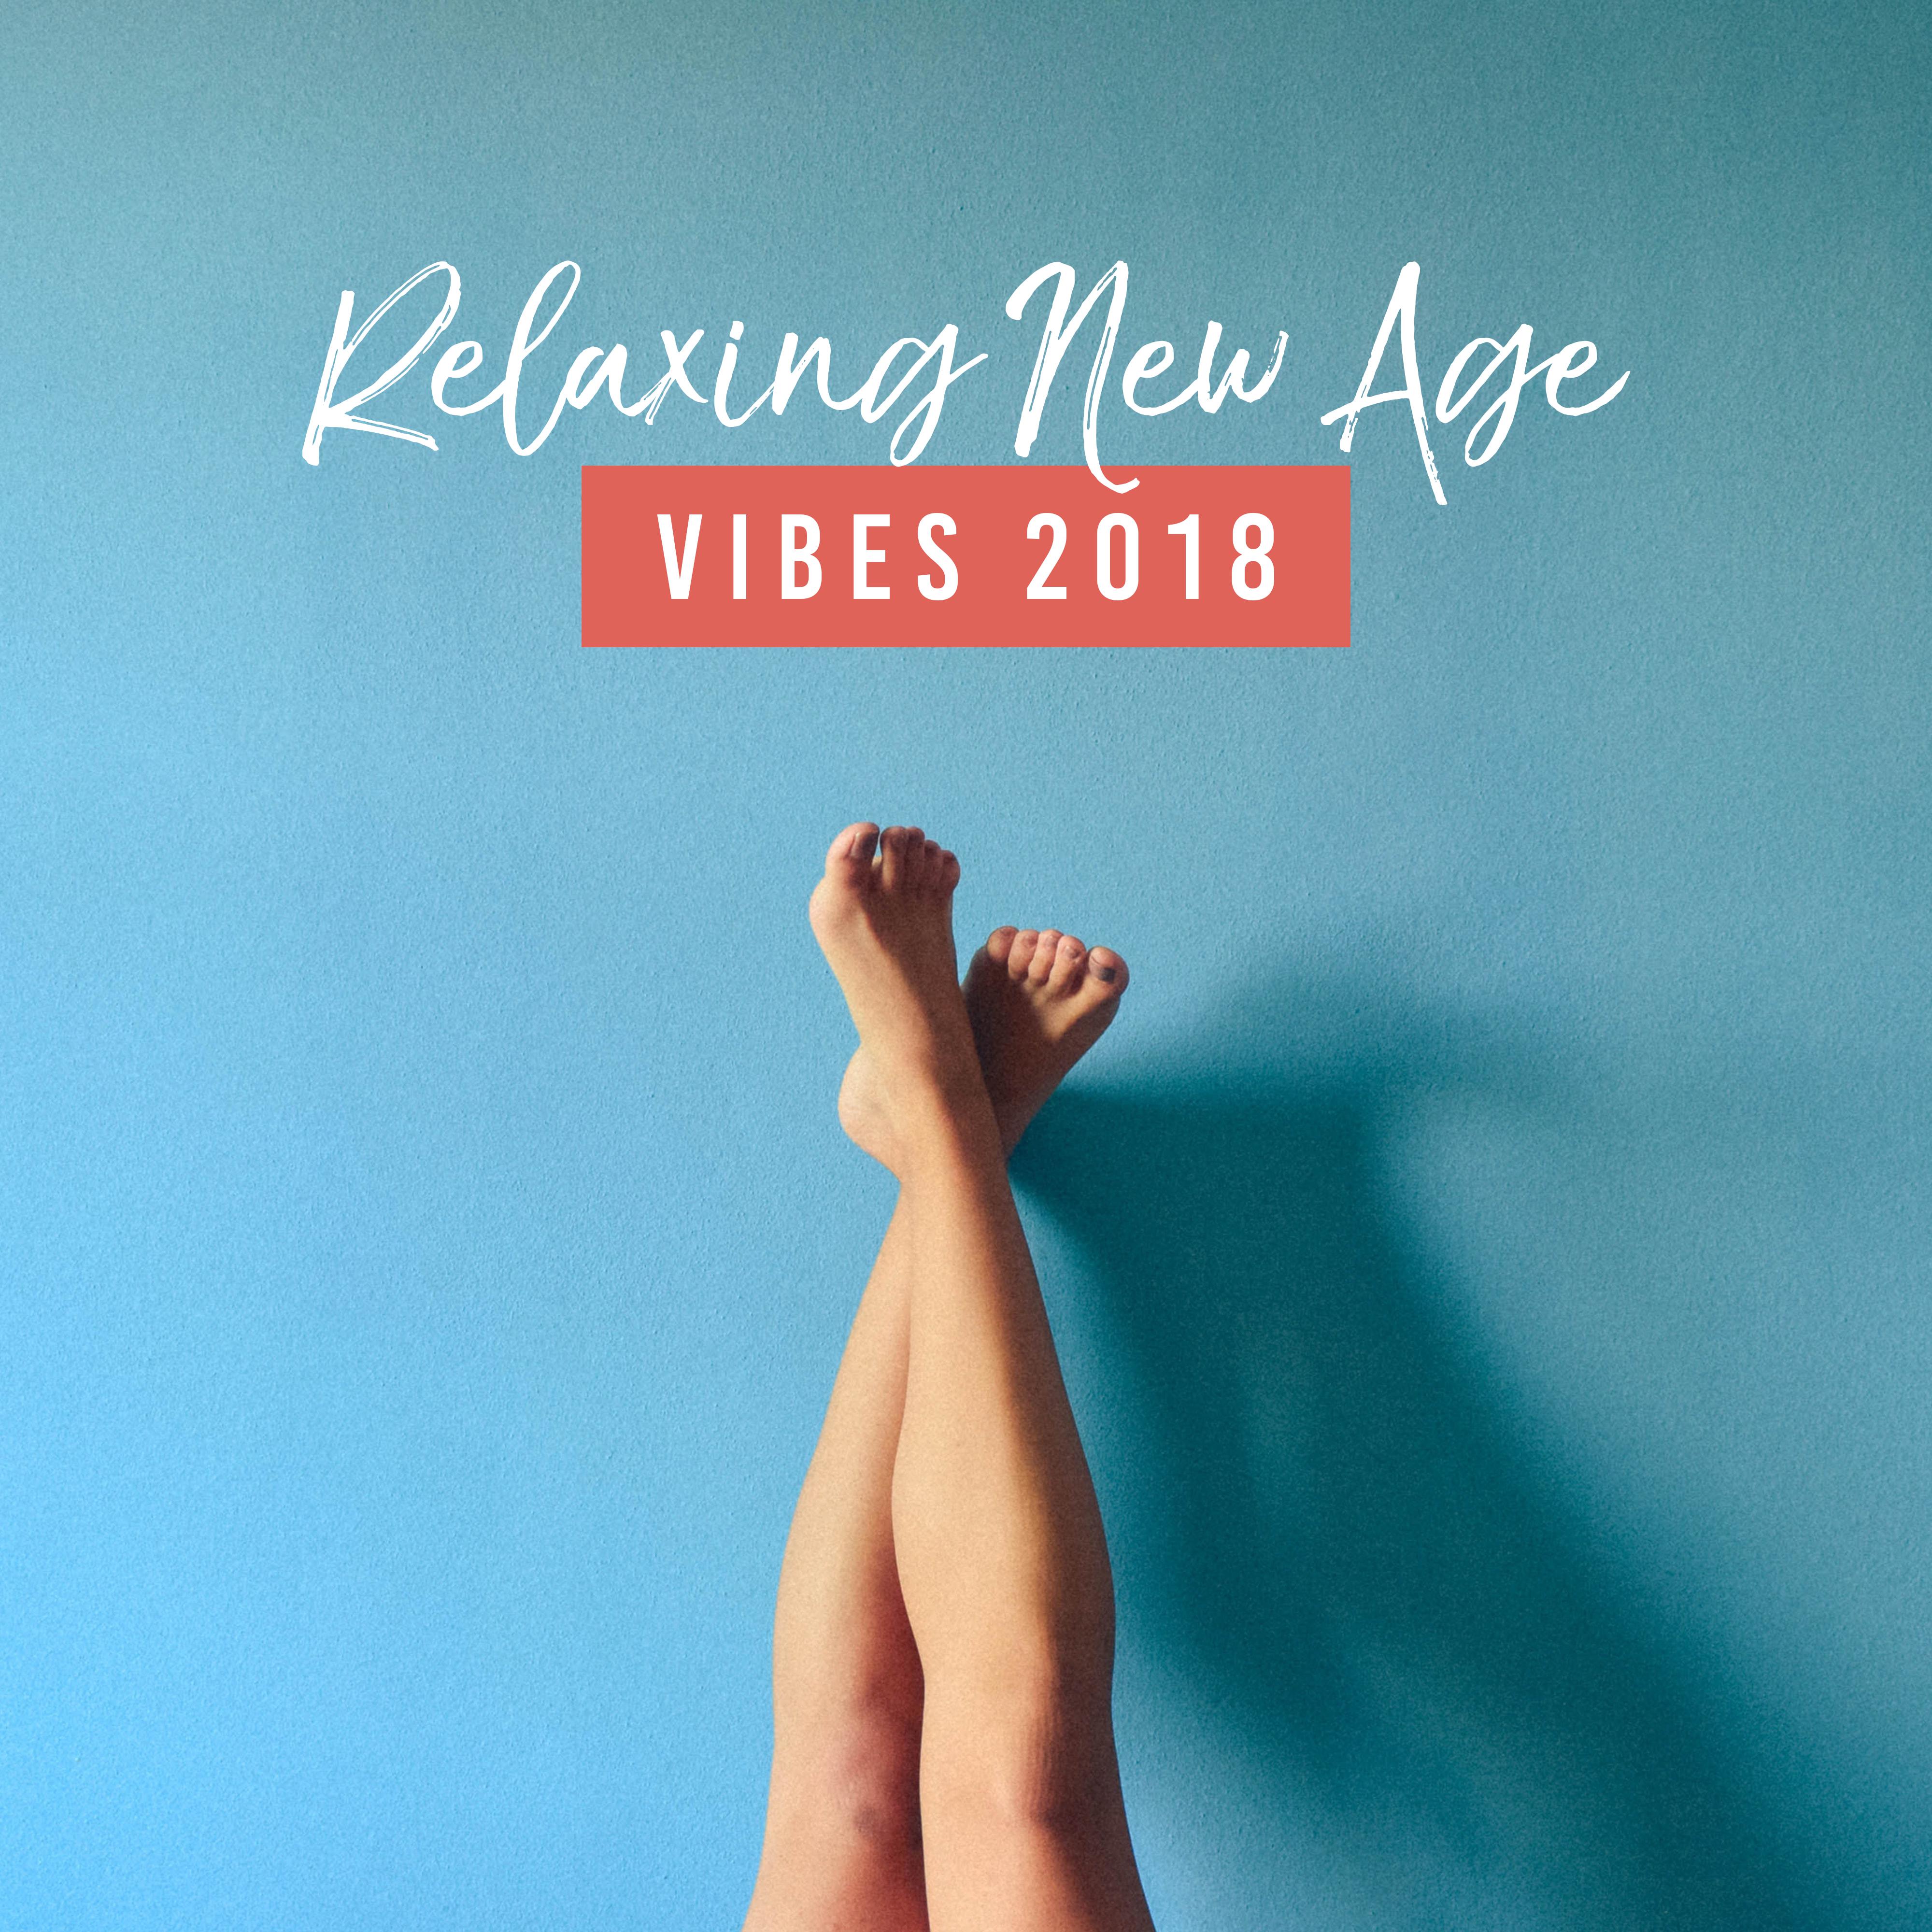 Relaxing New Age Vibes 2018